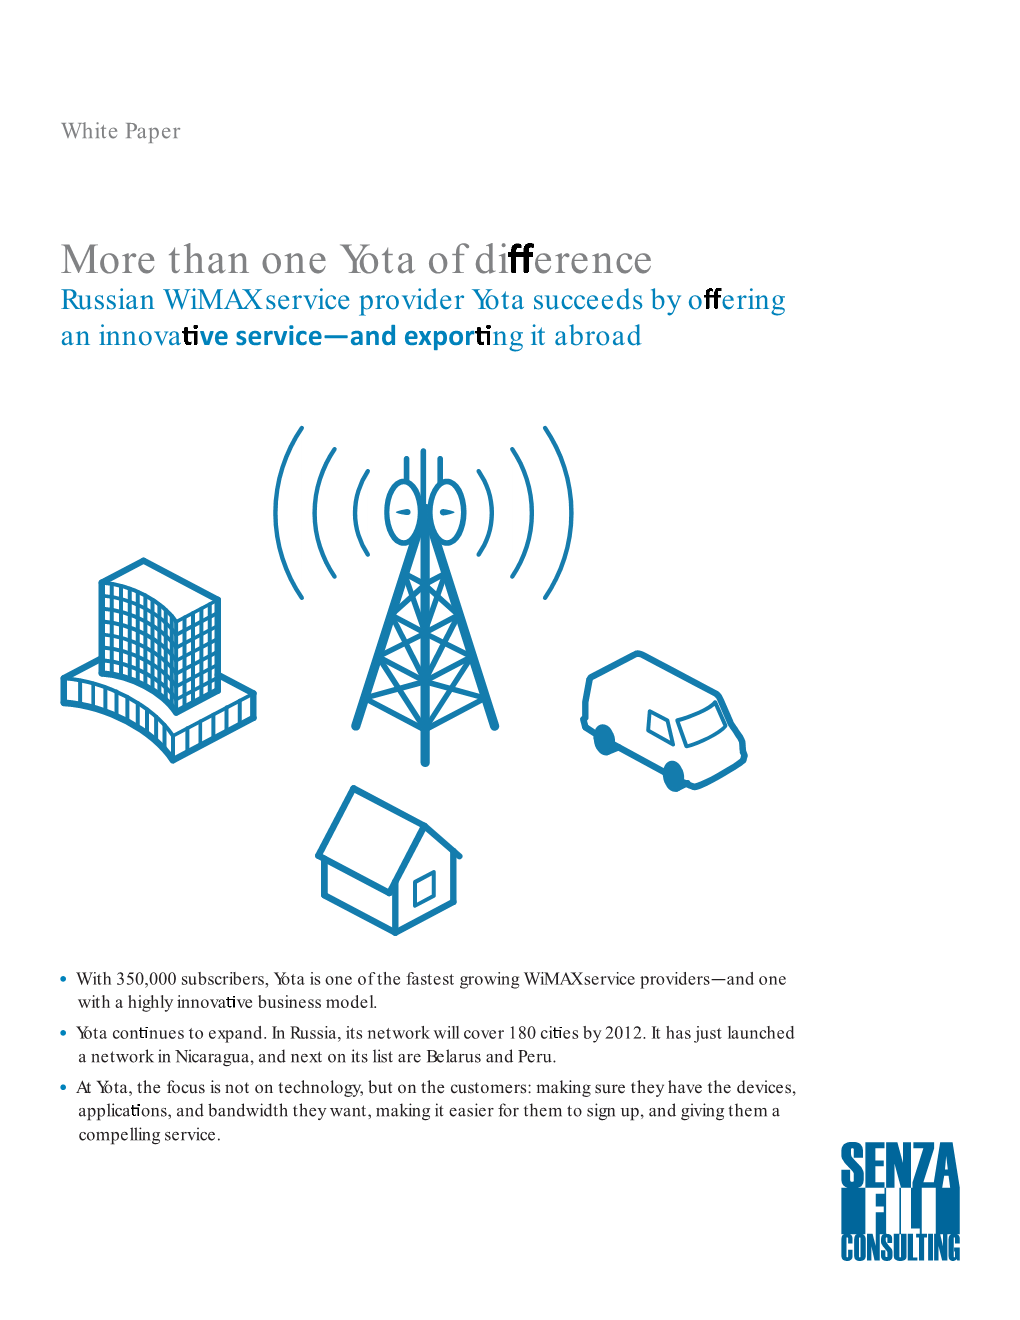 Than One Yota of Di Erence Russian Wimax Service Provider Yota Succeeds by O Ering an Innova Ve Service—And Expor Ng It Abroad